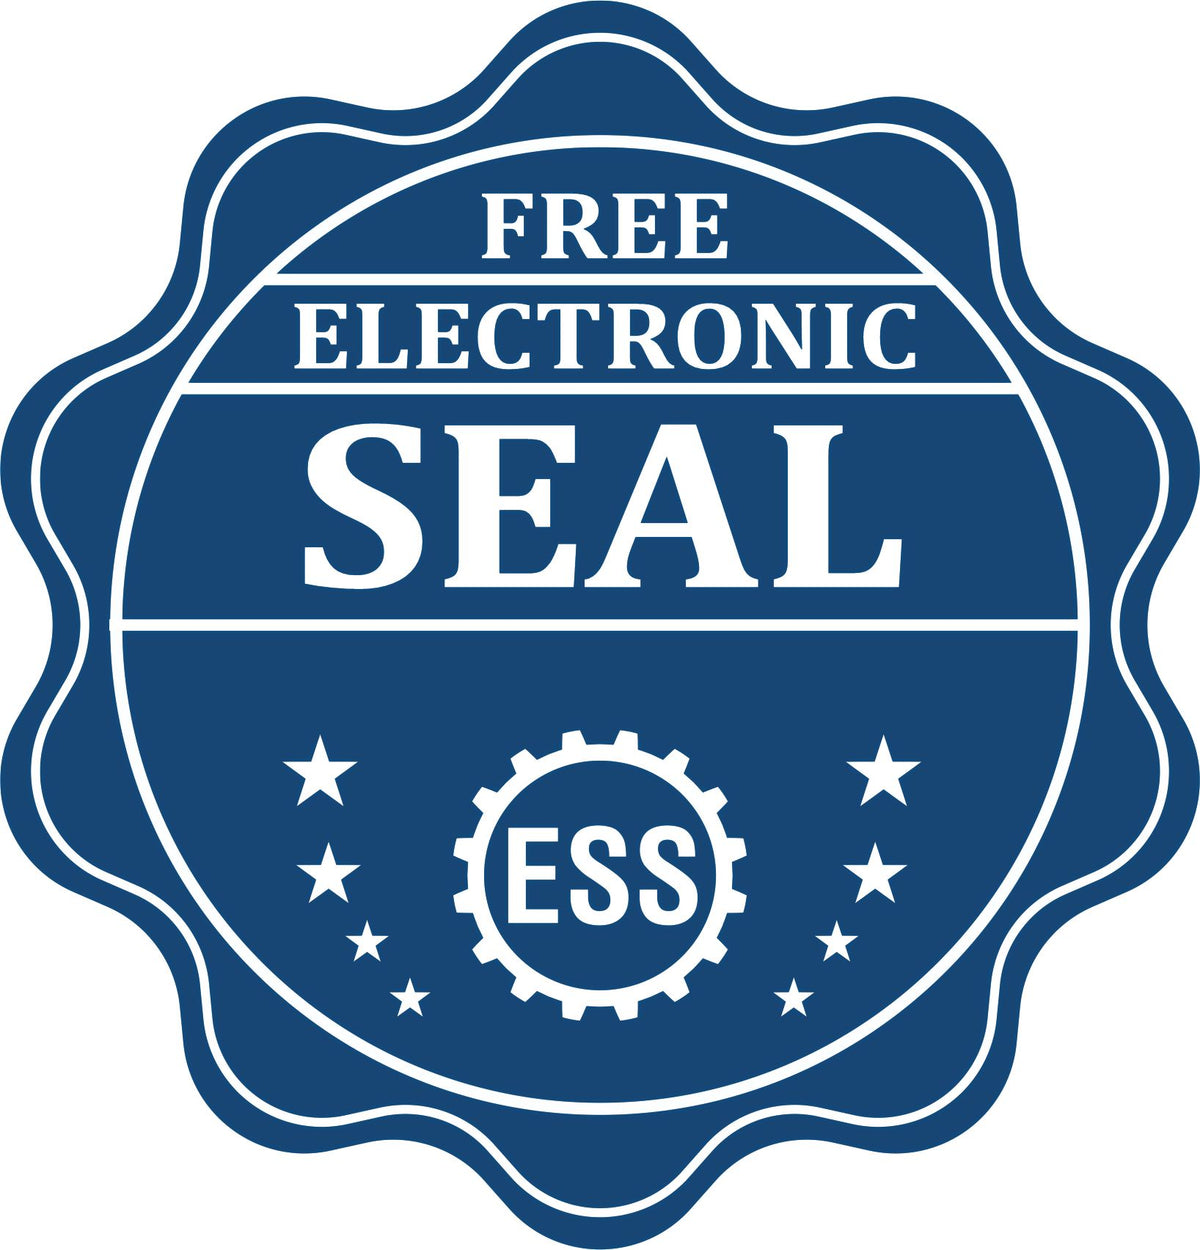 A badge showing a free electronic seal for the Super Slim Utah Notary Public Stamp with stars and the ESS gear on the emblem.